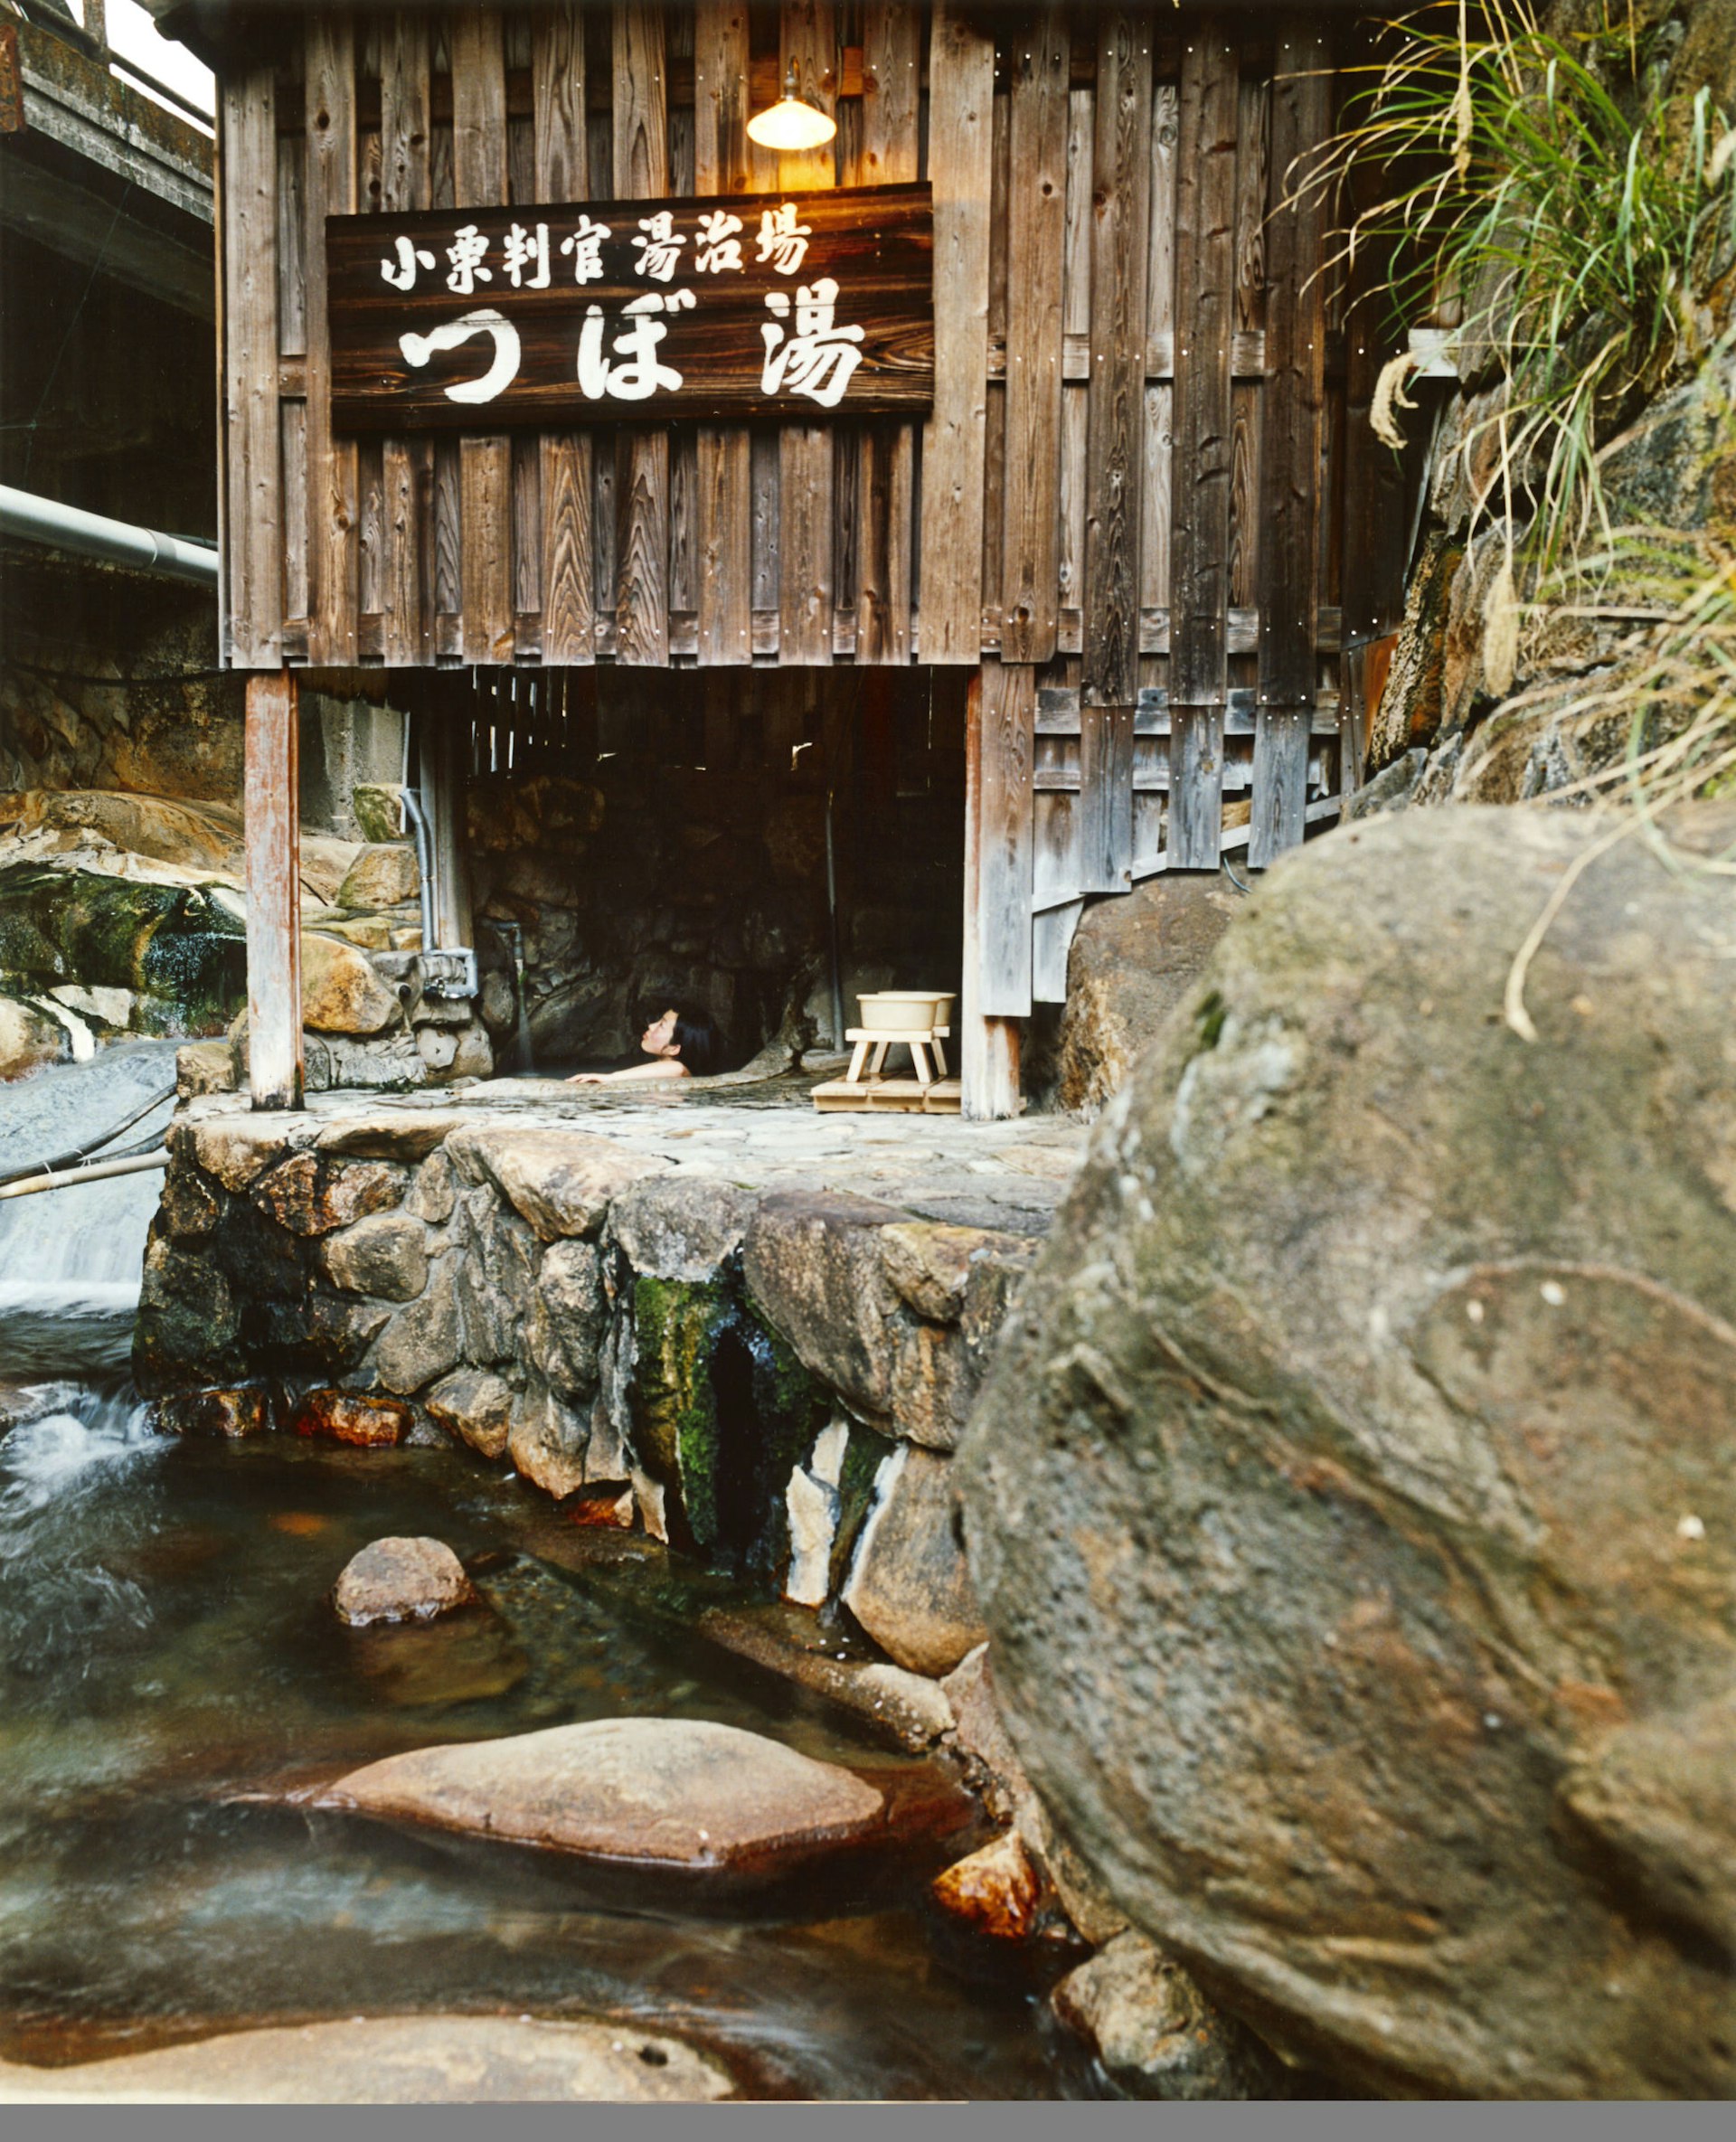 Woman soaking in Tsuboyu Onsen, sheltered by a wooden shack beside river